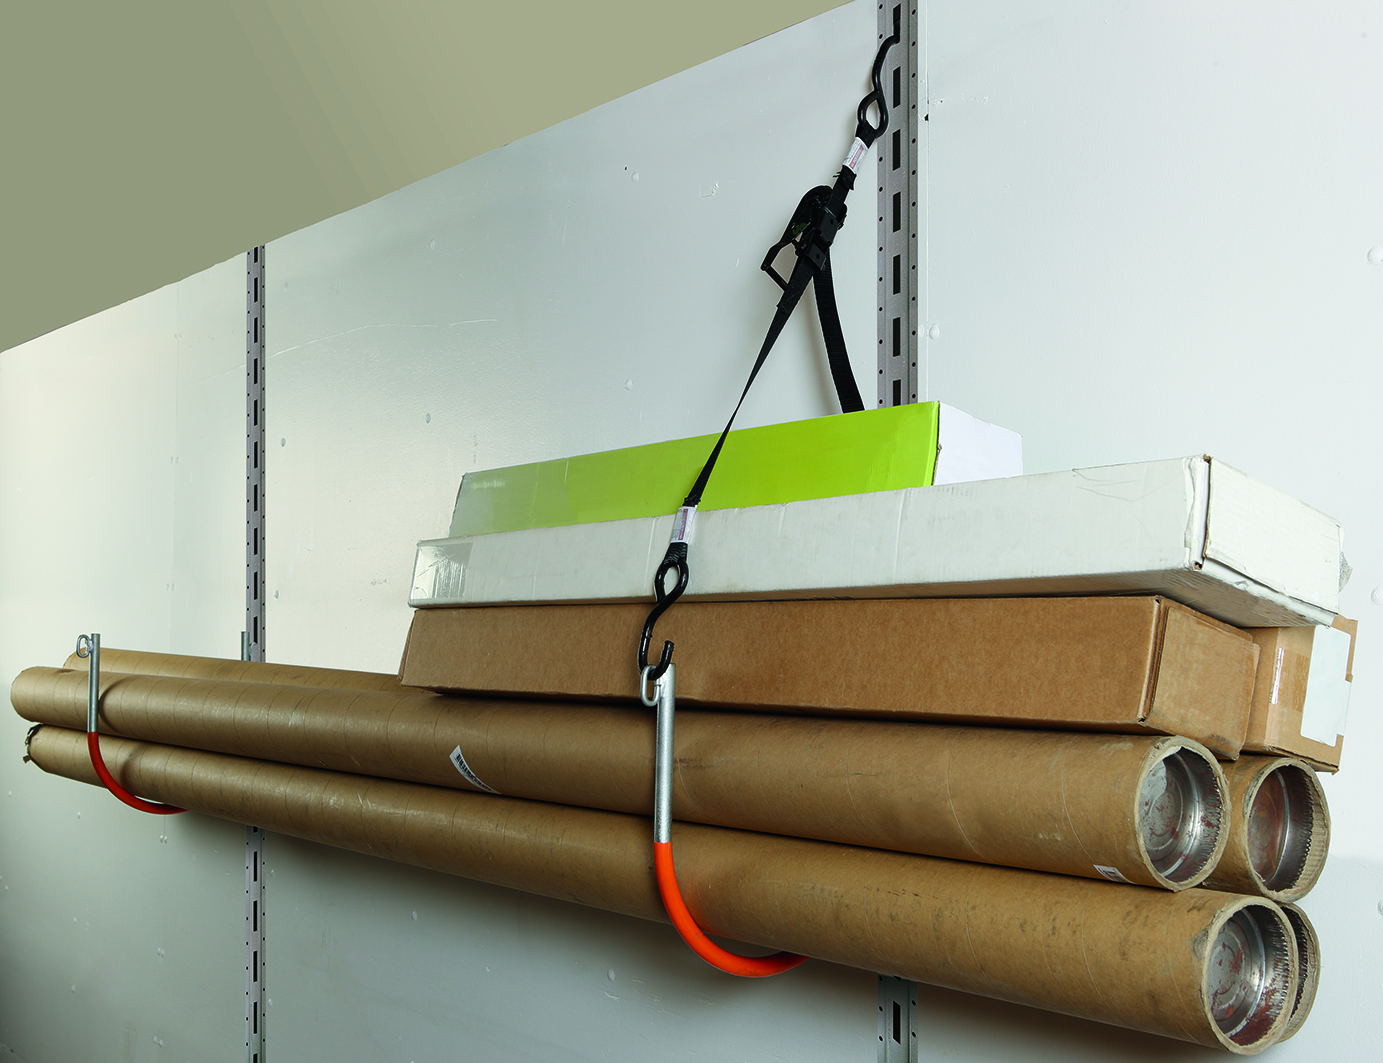 THE E-HOOK brand storage system reduces freight damage, increases revenue and turns empty wall space into usable storage areas and is patented.